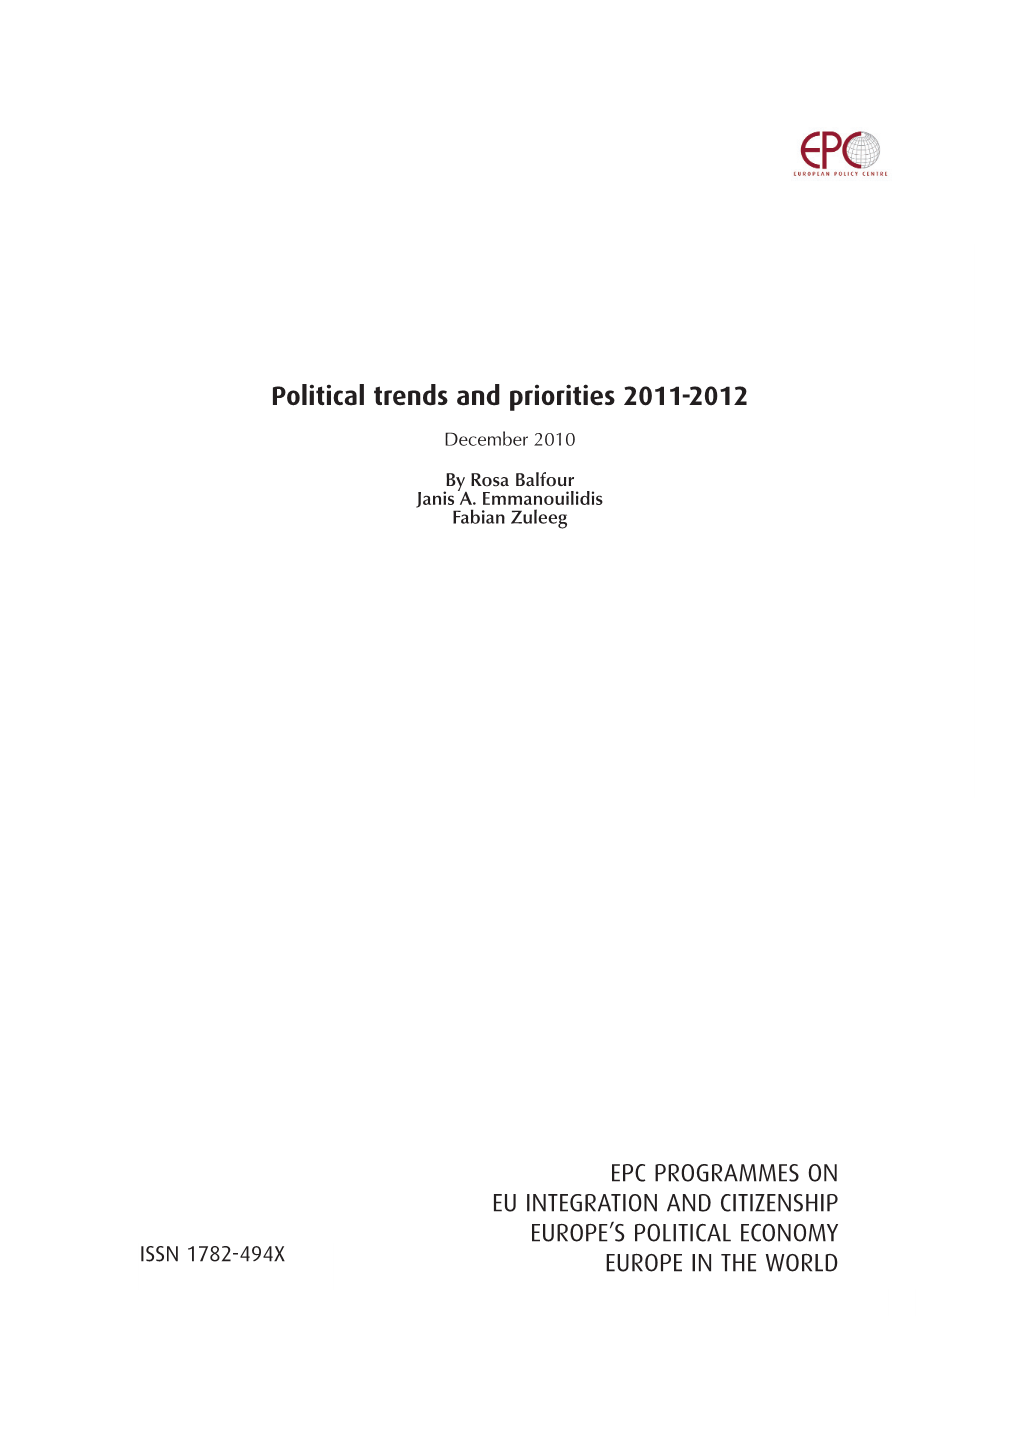 Political Trends and Priorities 2011-2012